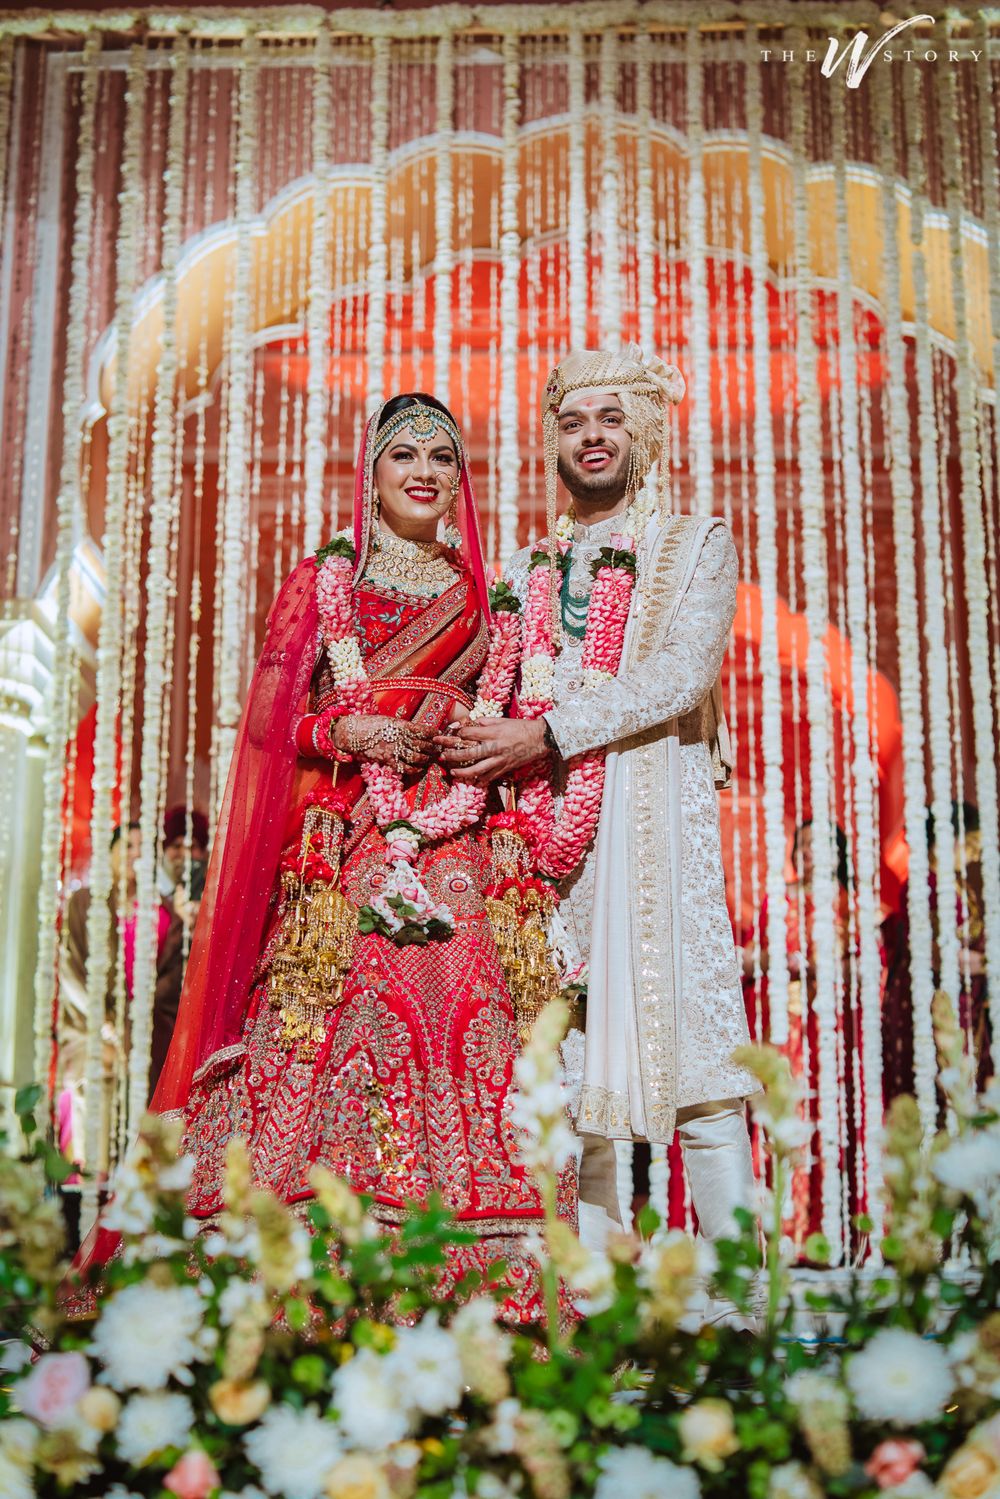 Photo of Bride and groom dressed in red and white respectively.